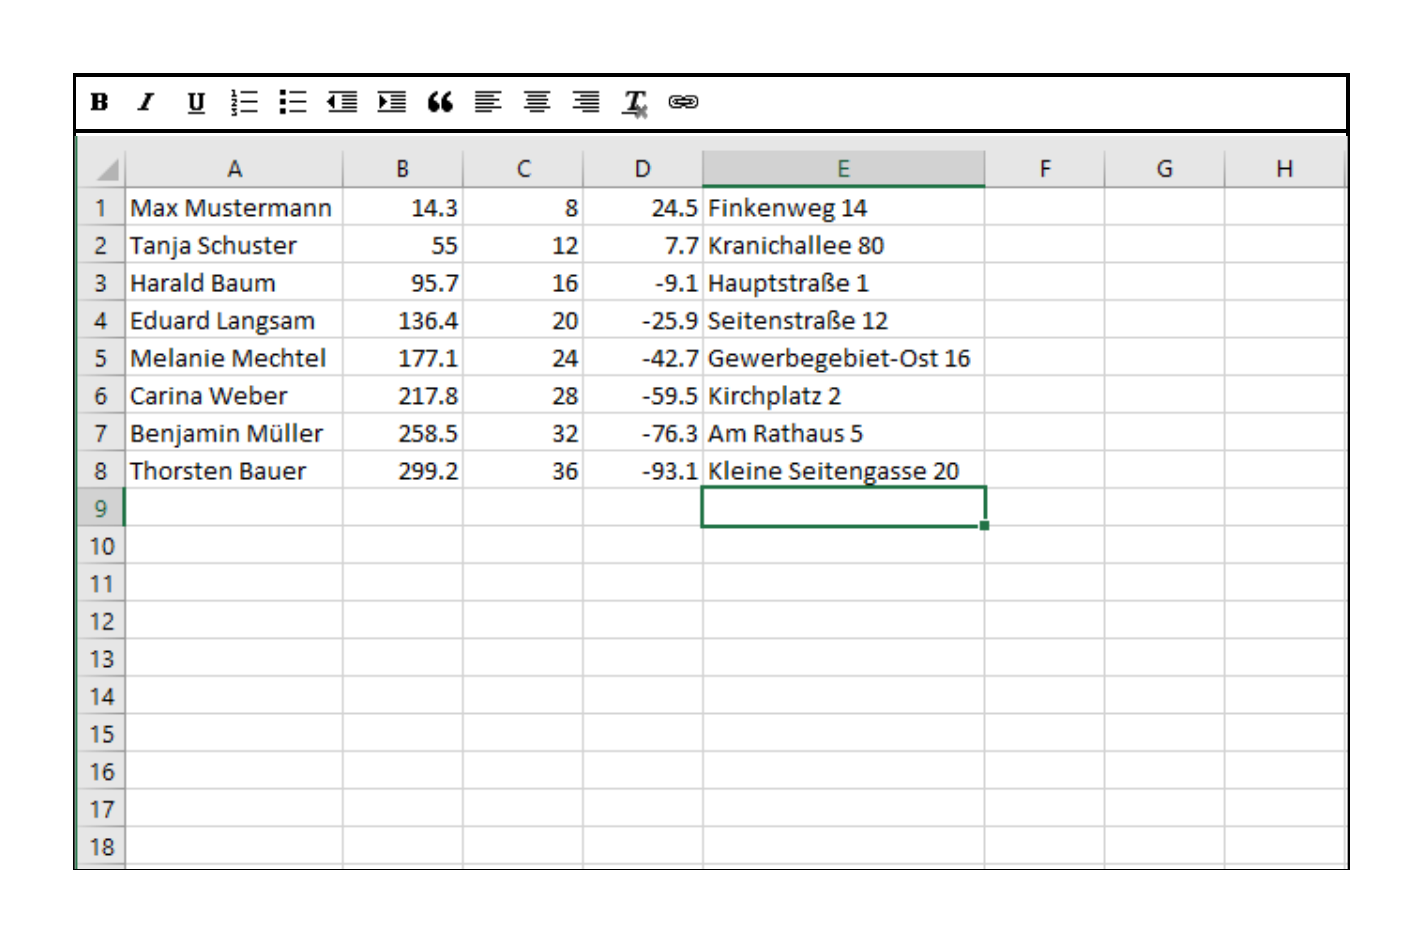 Excel-like table view